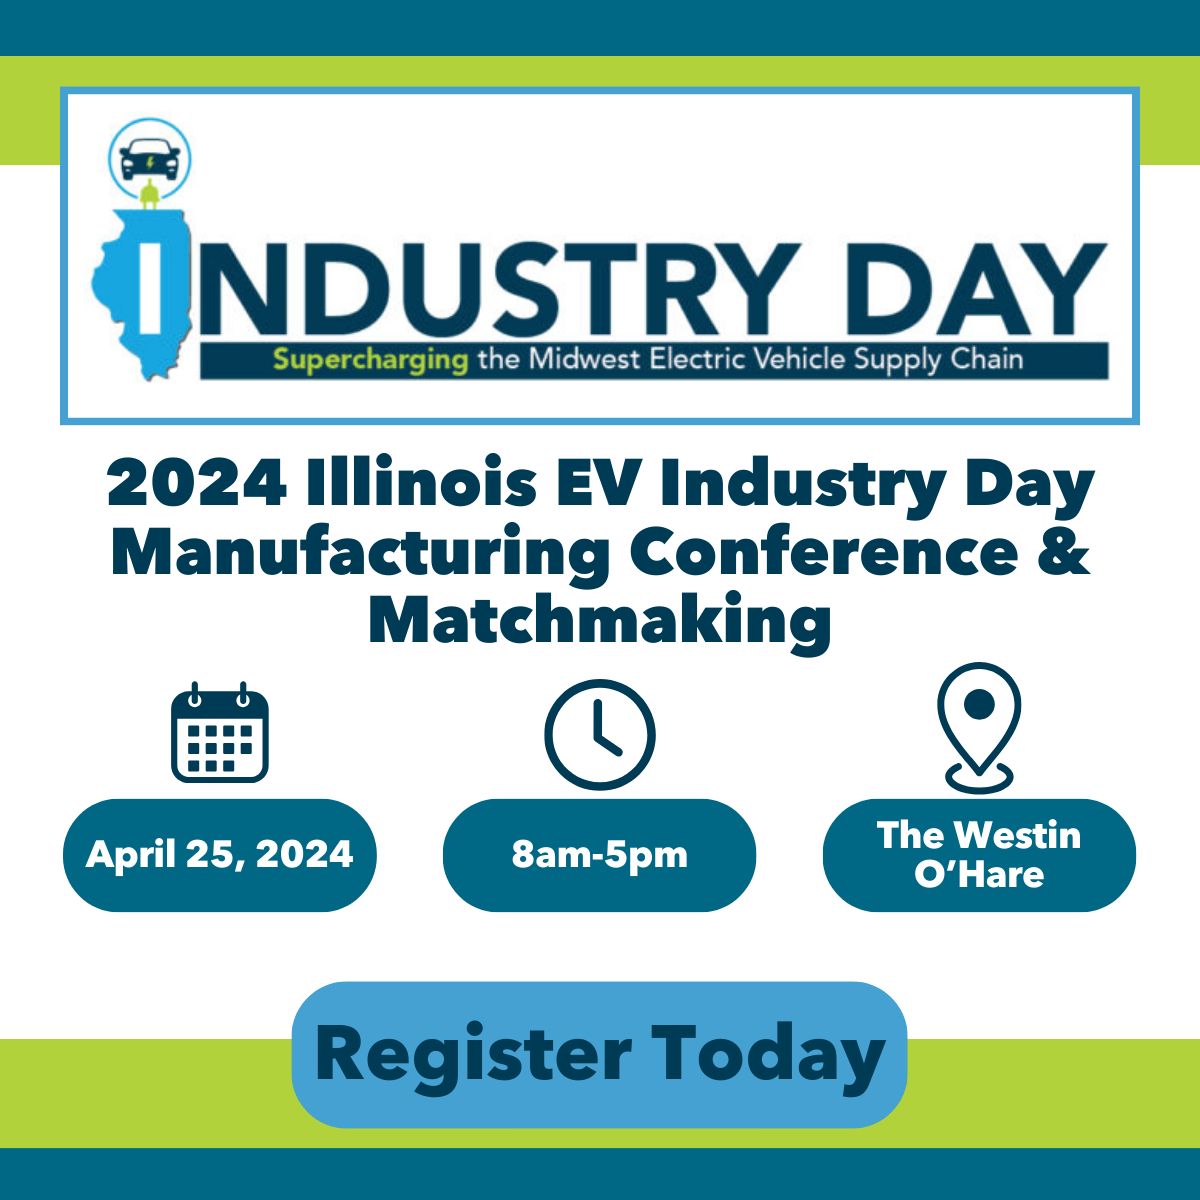 Don’t miss the opportunity to join us for #EVDayIL on April 25! Featuring a fireside chat w/ @GovPritzker and exploration of emerging trends, market opportunities & innovative solutions shaping the future of the EV Industry. TICKETS  ARE LIMTED: bit.ly/3Uc6NJi